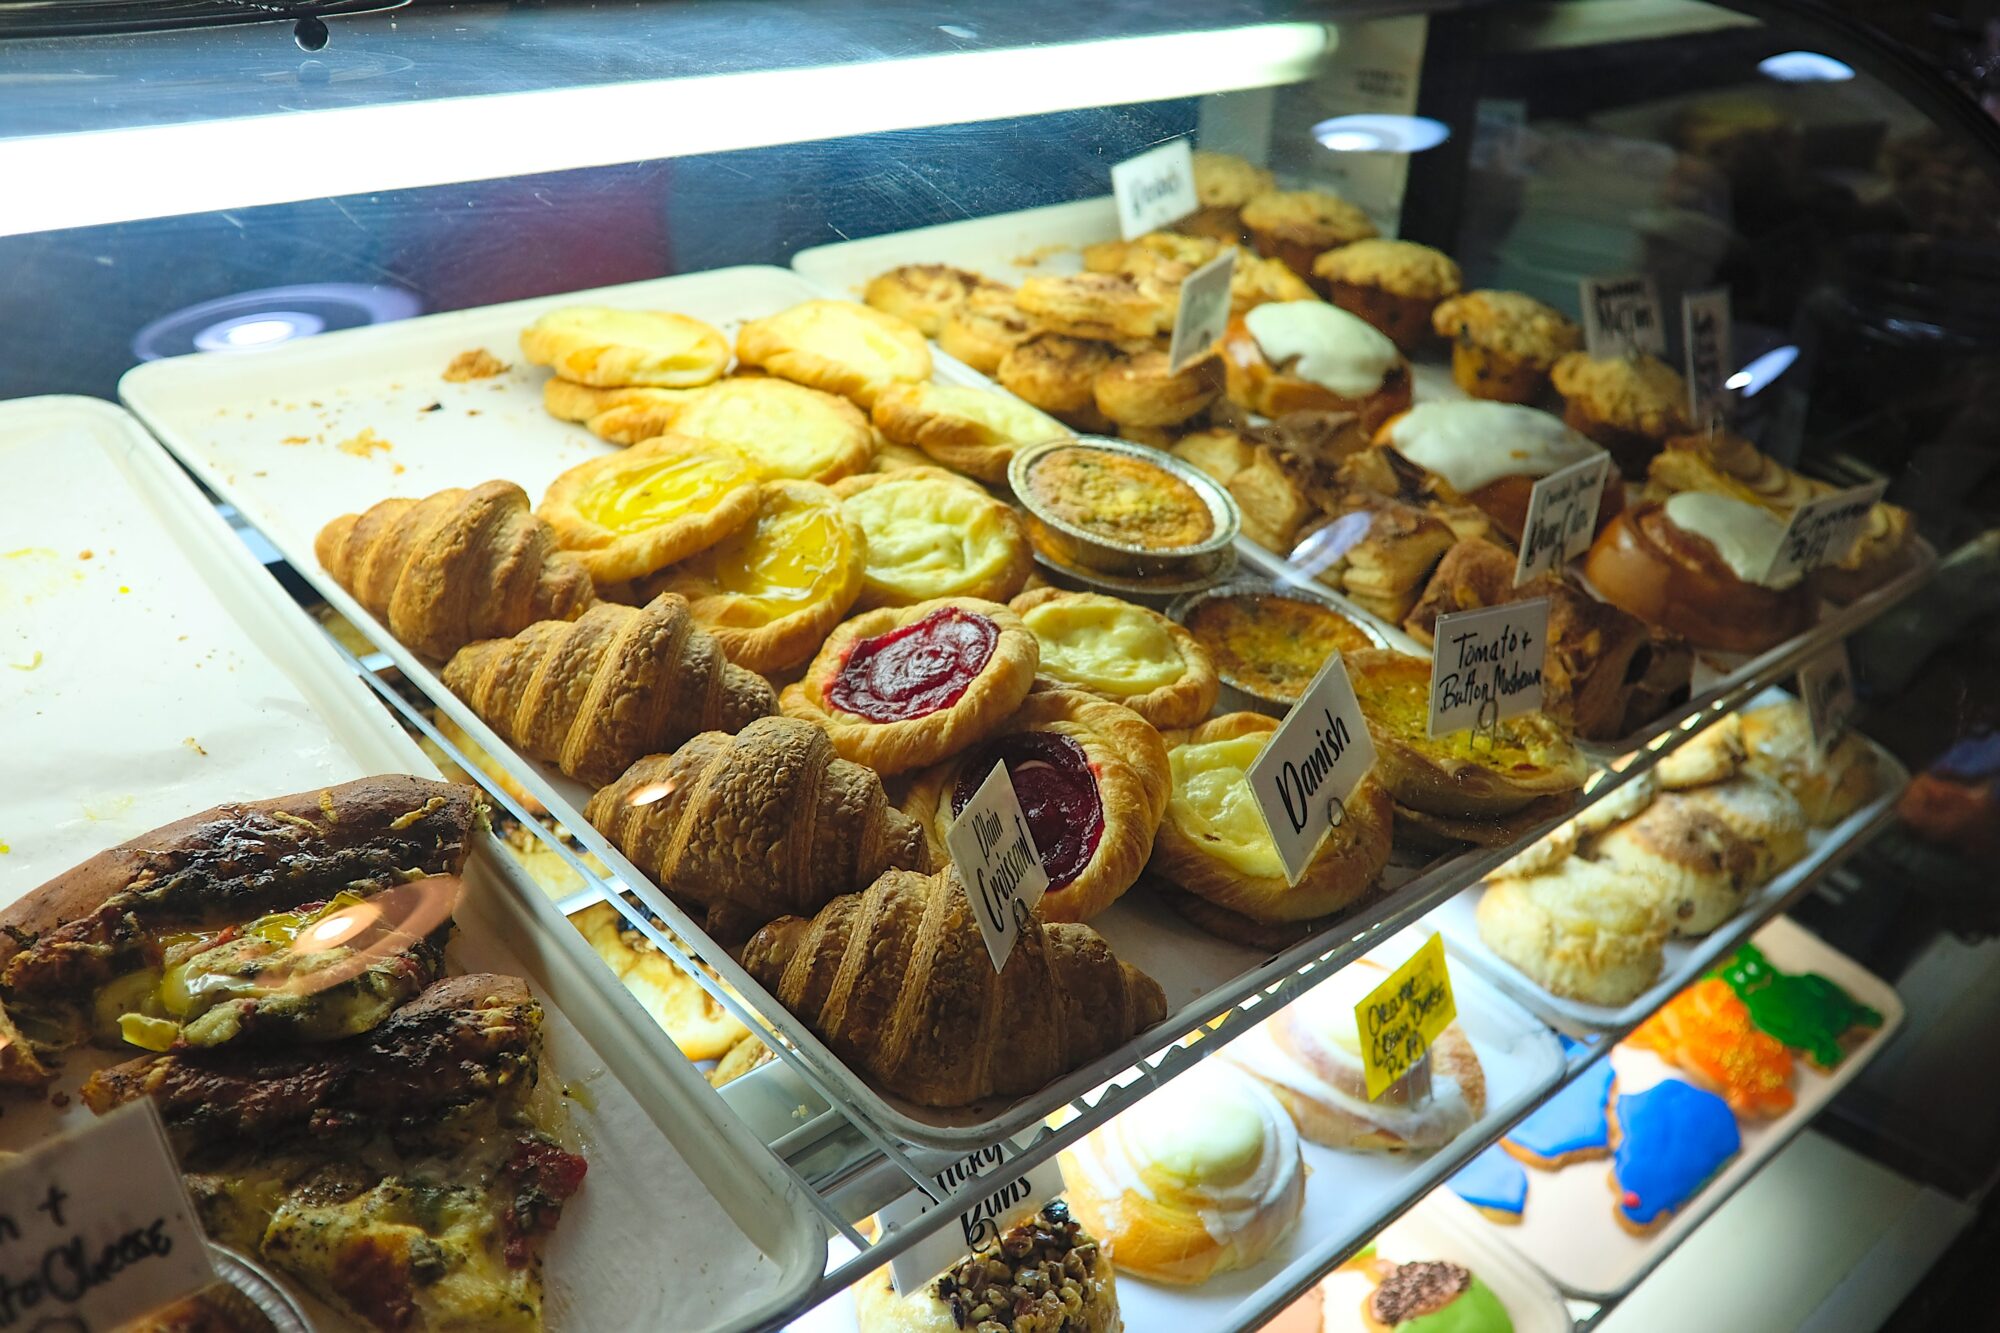 A pastry case at Kirchhoff's in Paducah